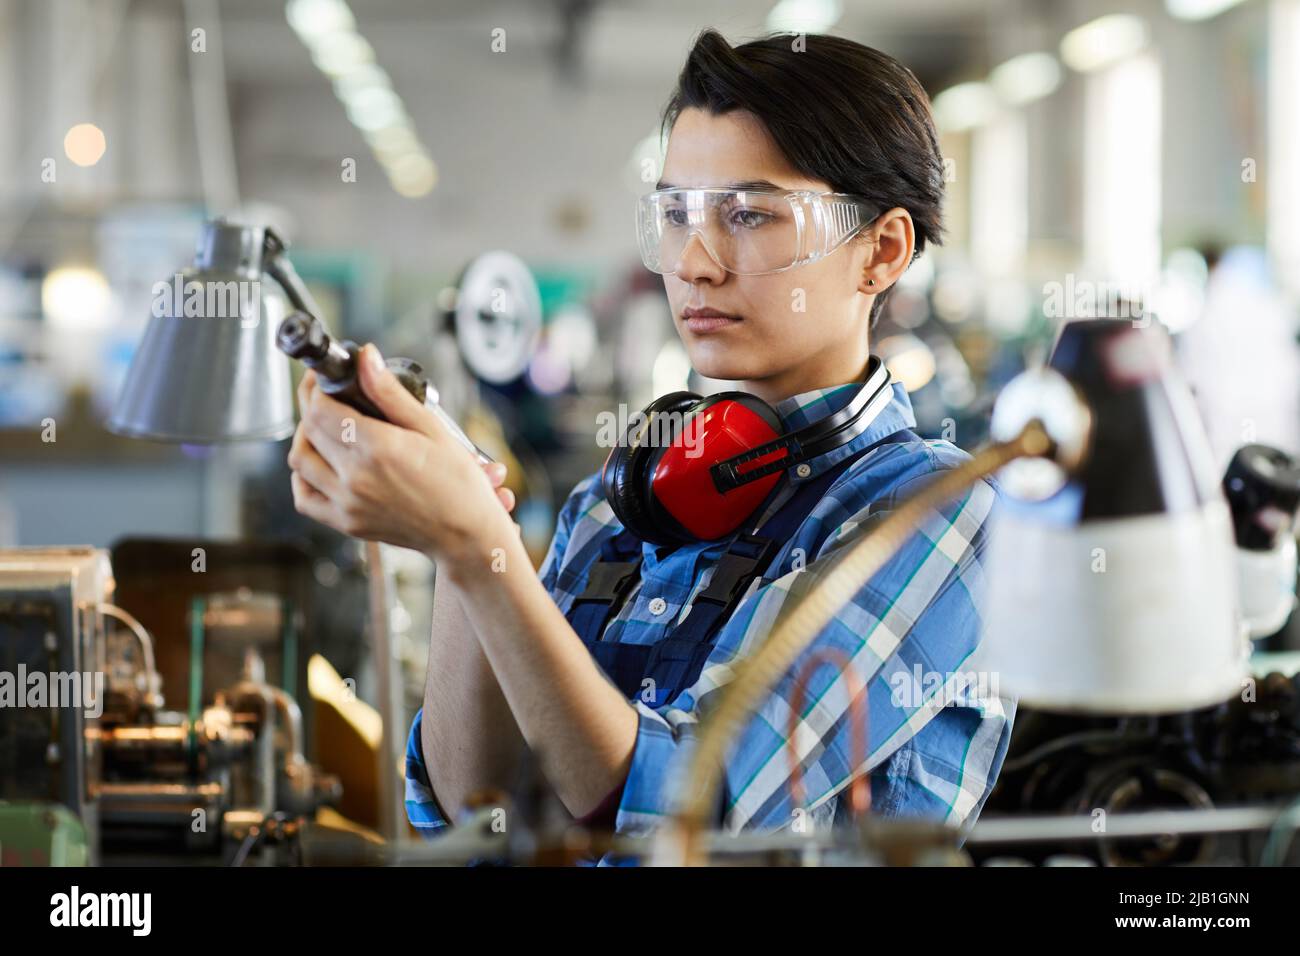 Concentrated young female repairing engineer in safety goggles standing between industrial machines and viewing cutting tool at factory shop Stock Photo